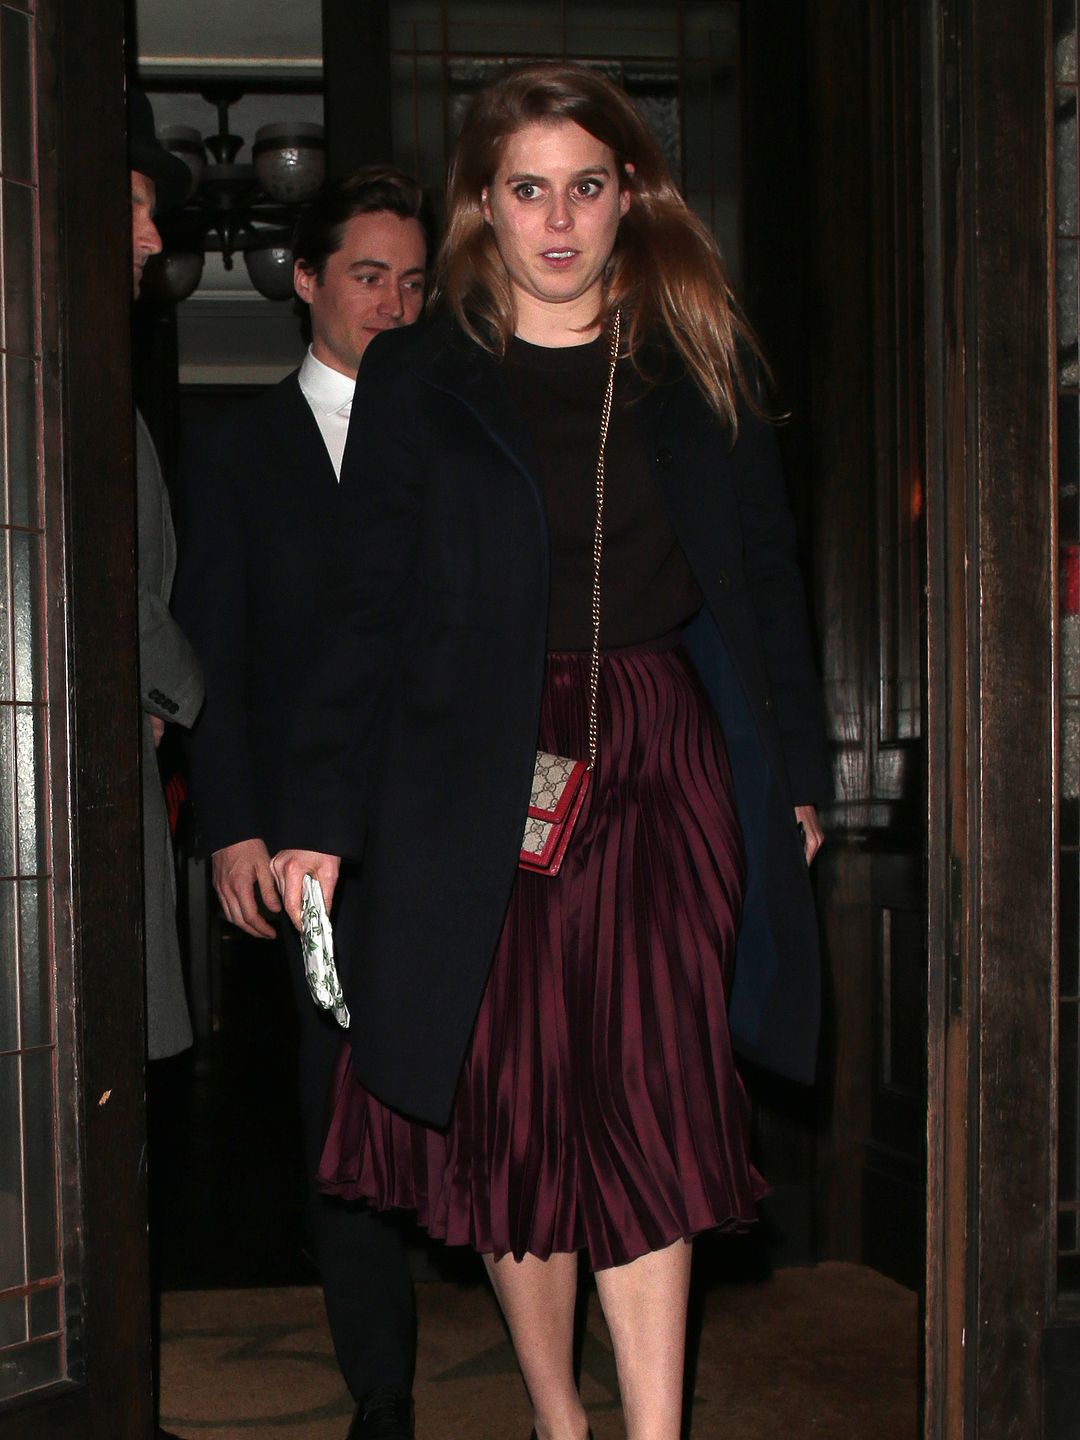 Princess Beatrice of York (R) and Edoardo Mapelli Mozzi seen on a night out at 34 restaurant 